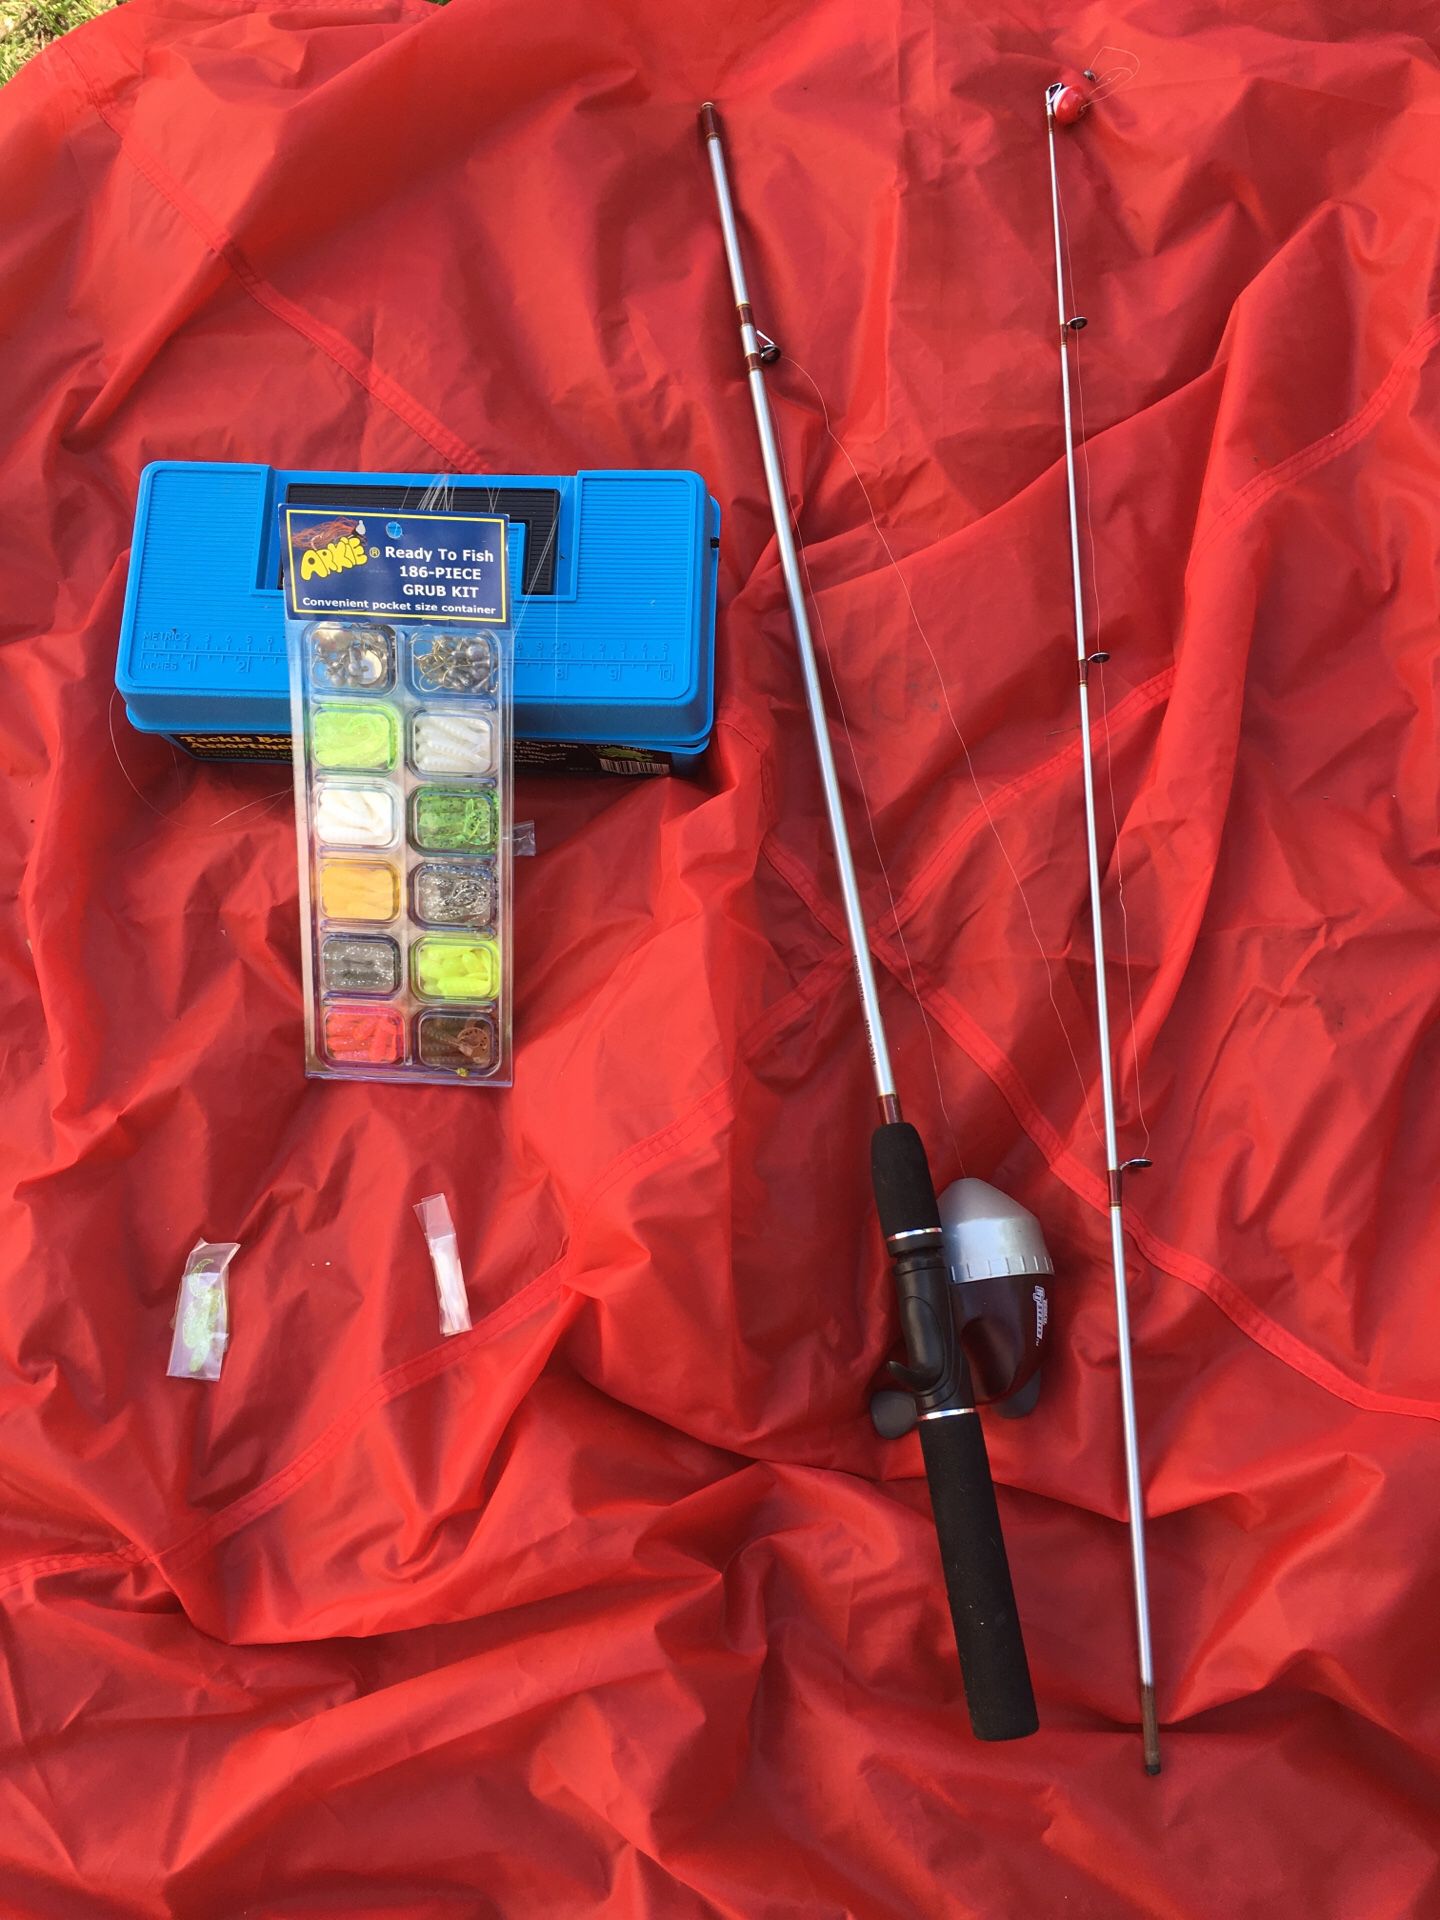 Push button fishing pole, with tackle box and lures